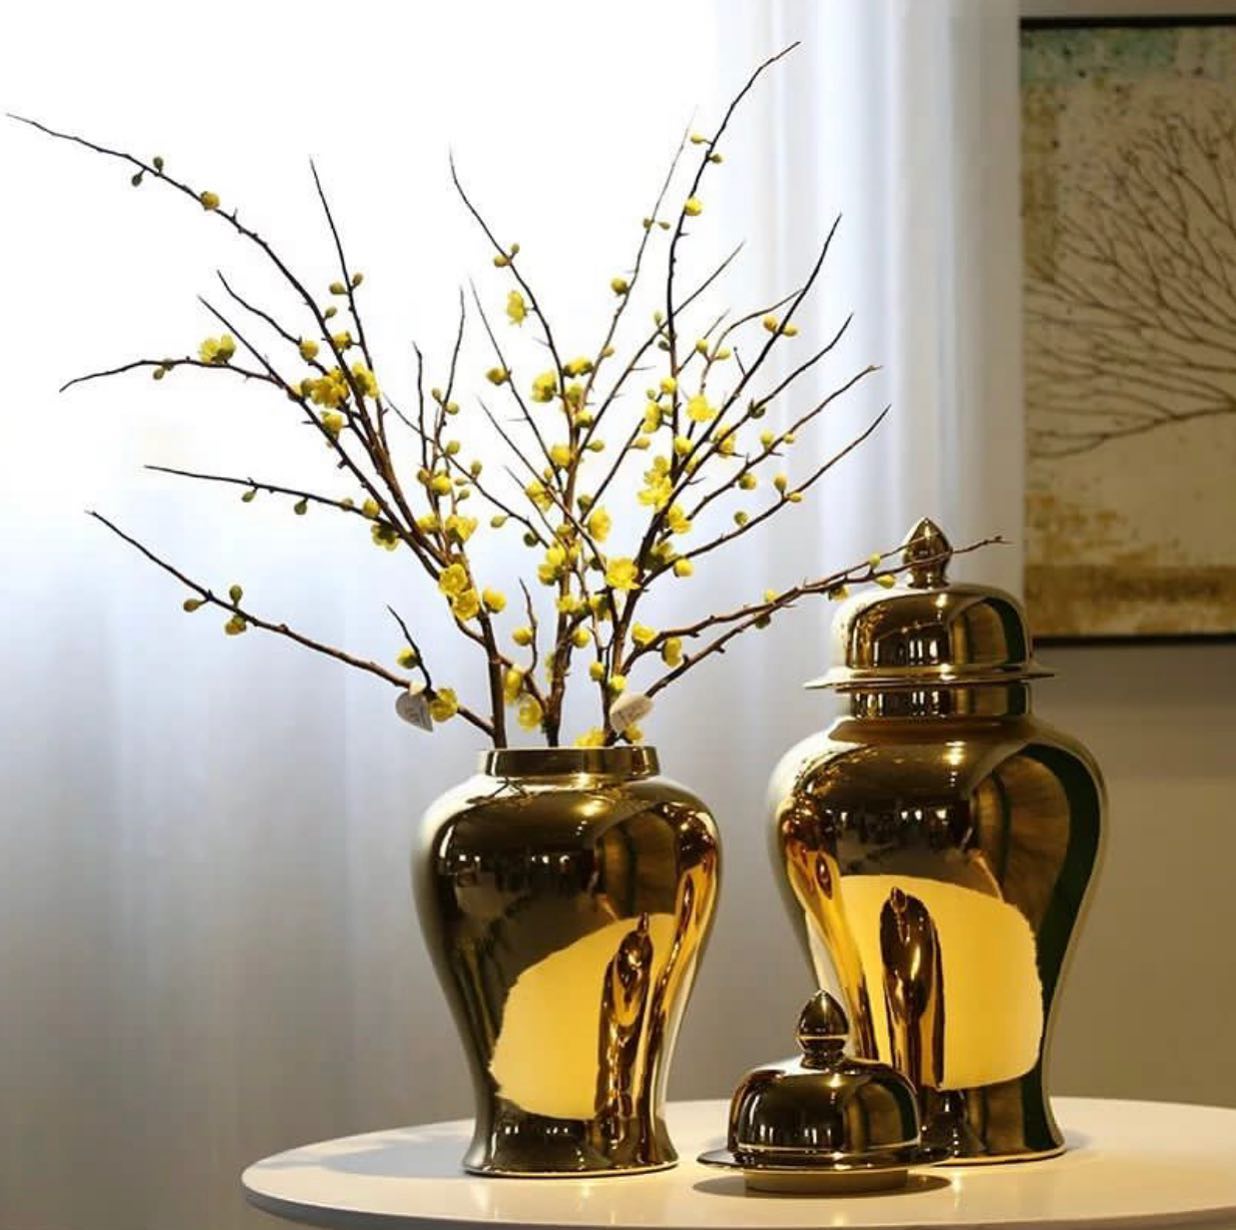 Ceramic Golden Urn - Available in 2 Sizes